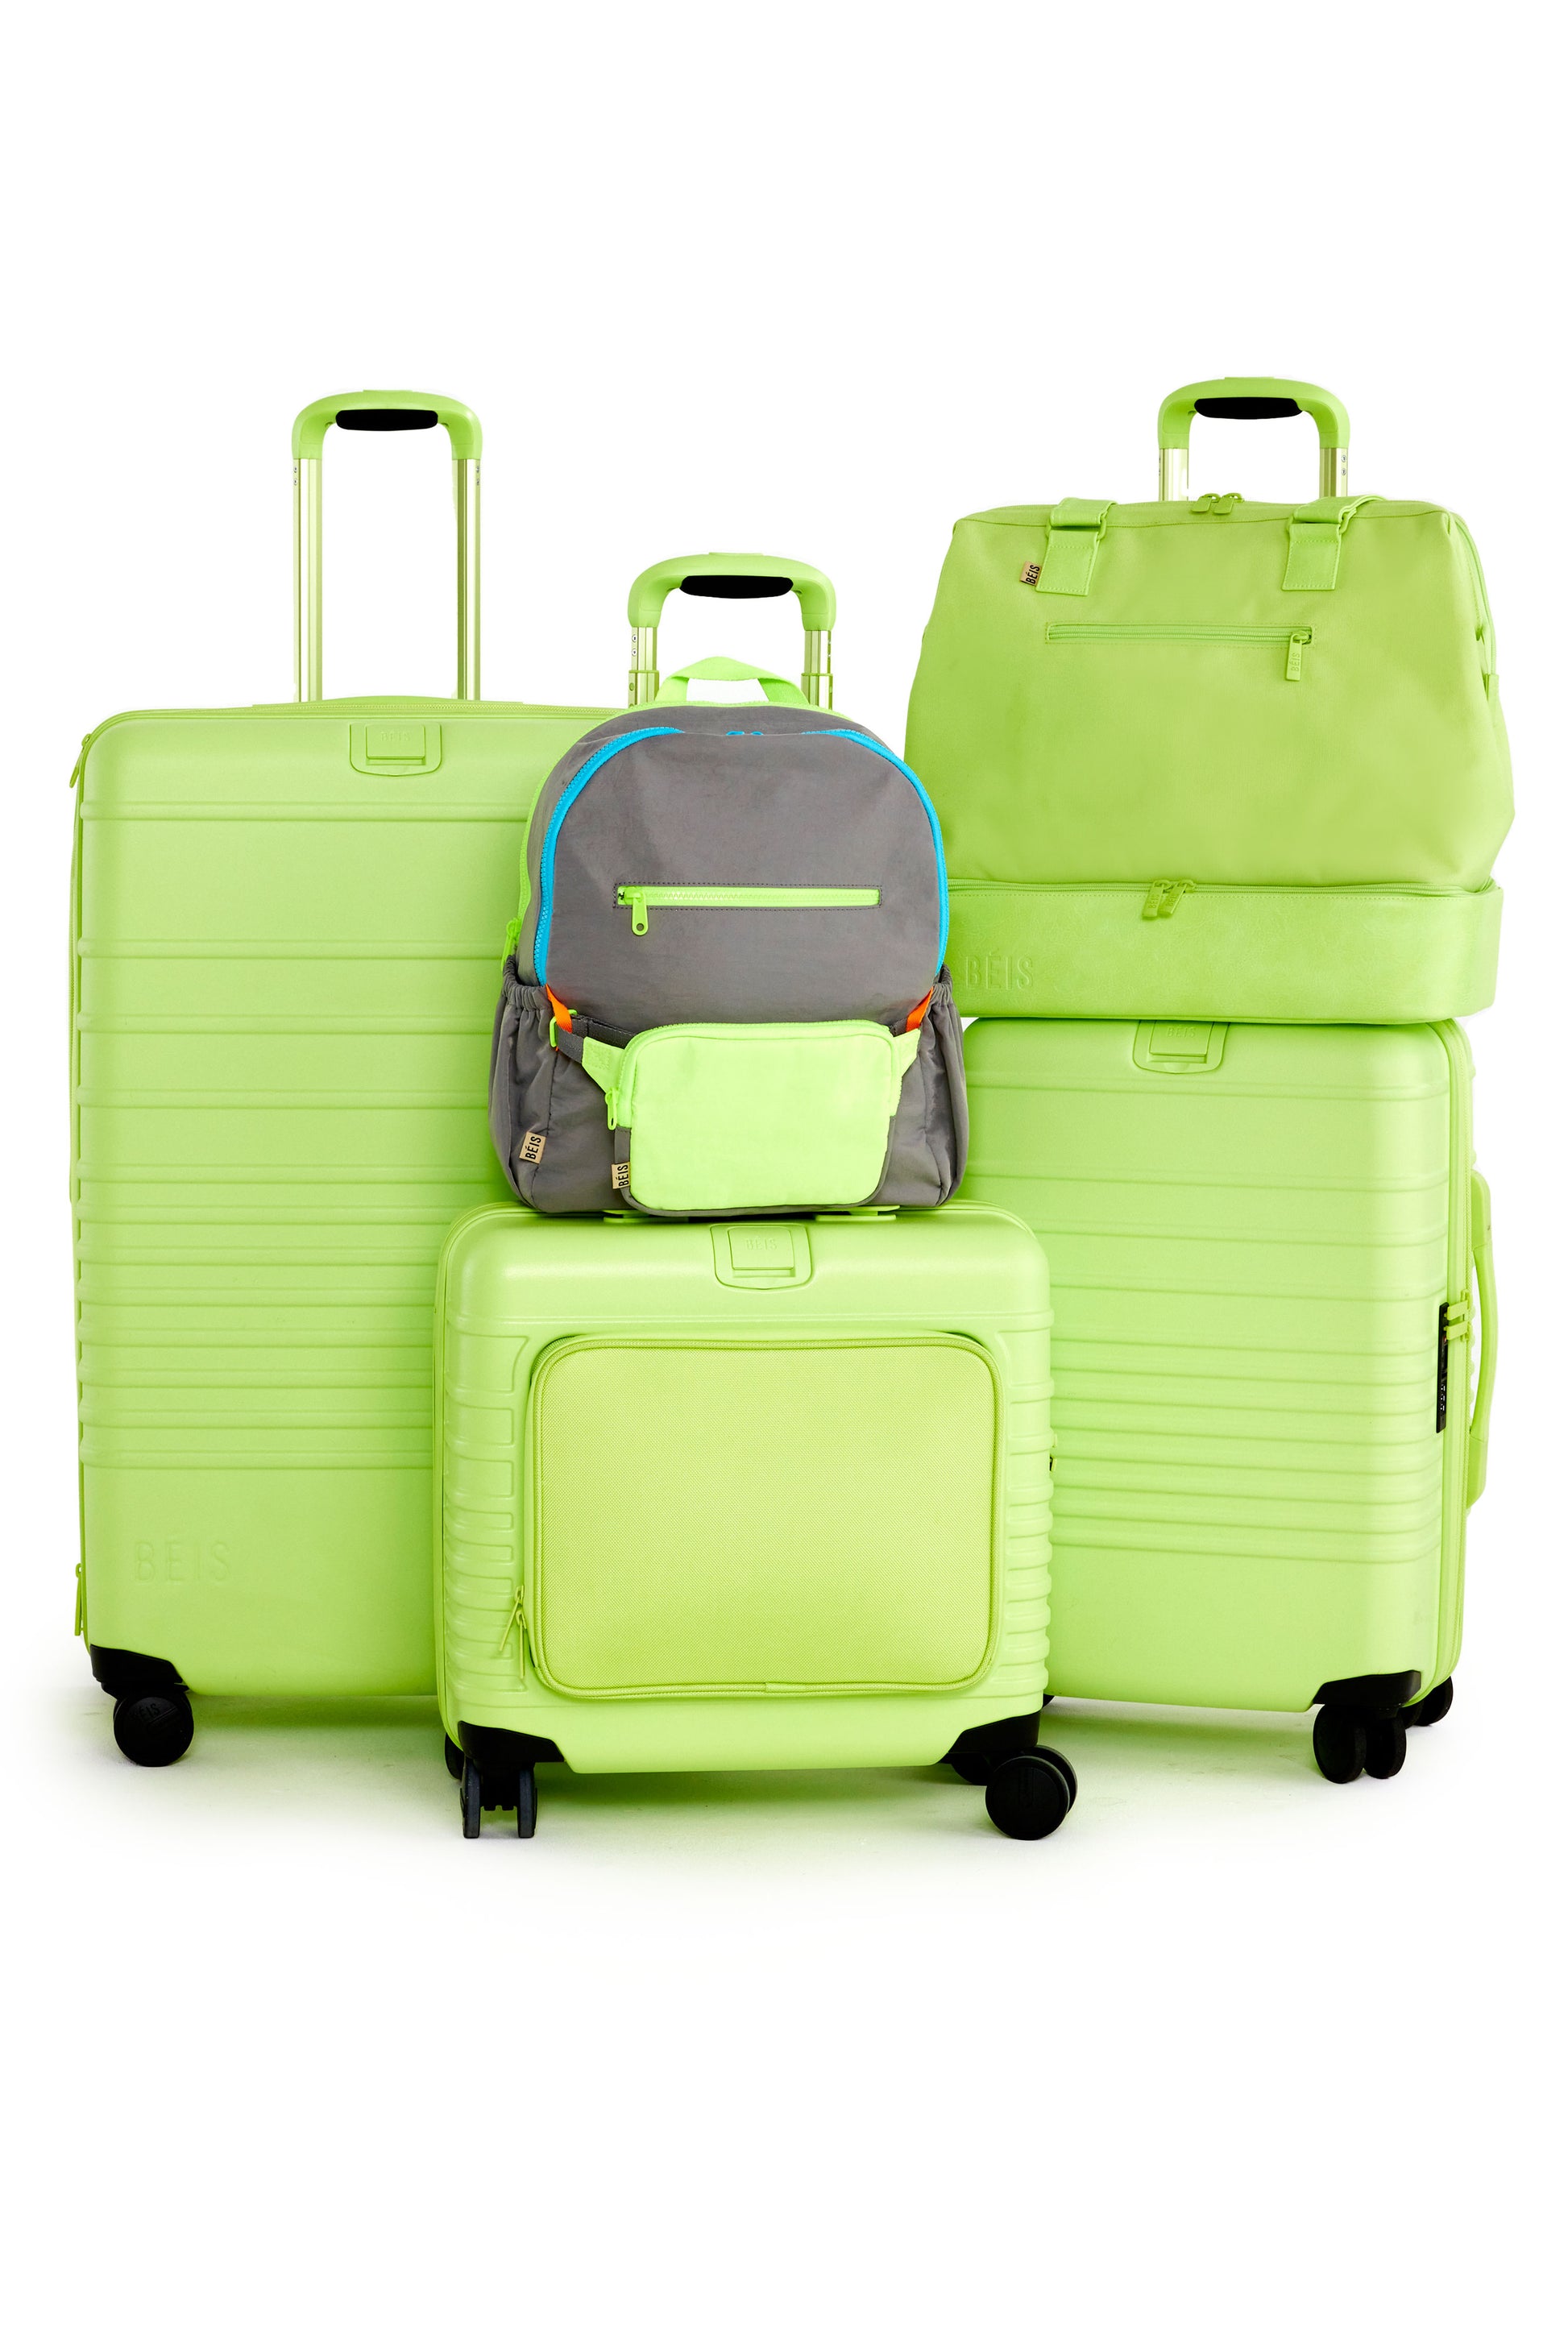 Best Suitcases for Kids' Carry-On Luggage - Go Green Travel Green